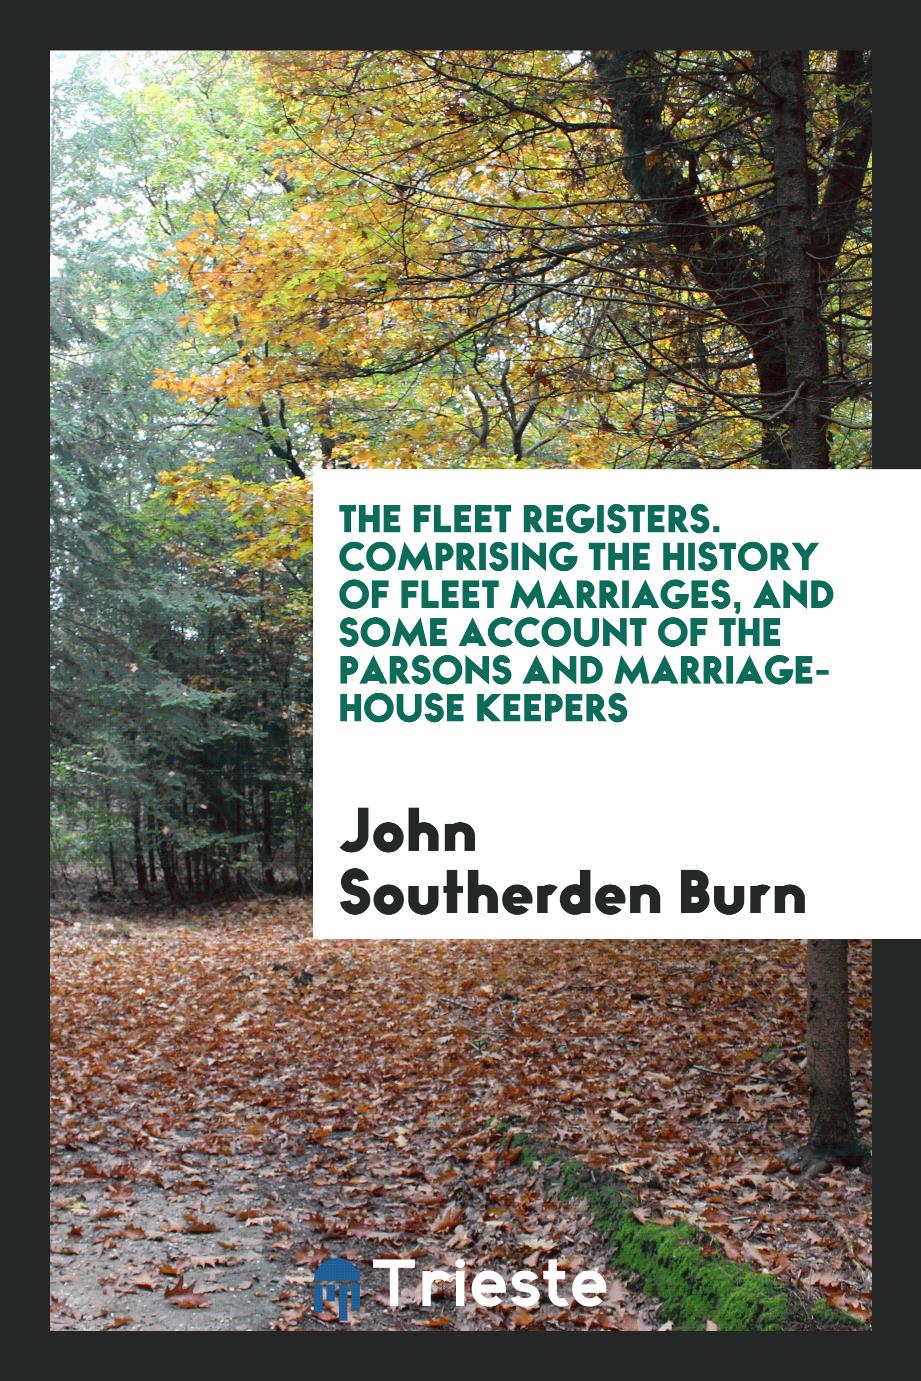 The Fleet registers. Comprising the history of Fleet marriages, and some account of the parsons and marriage-house keepers